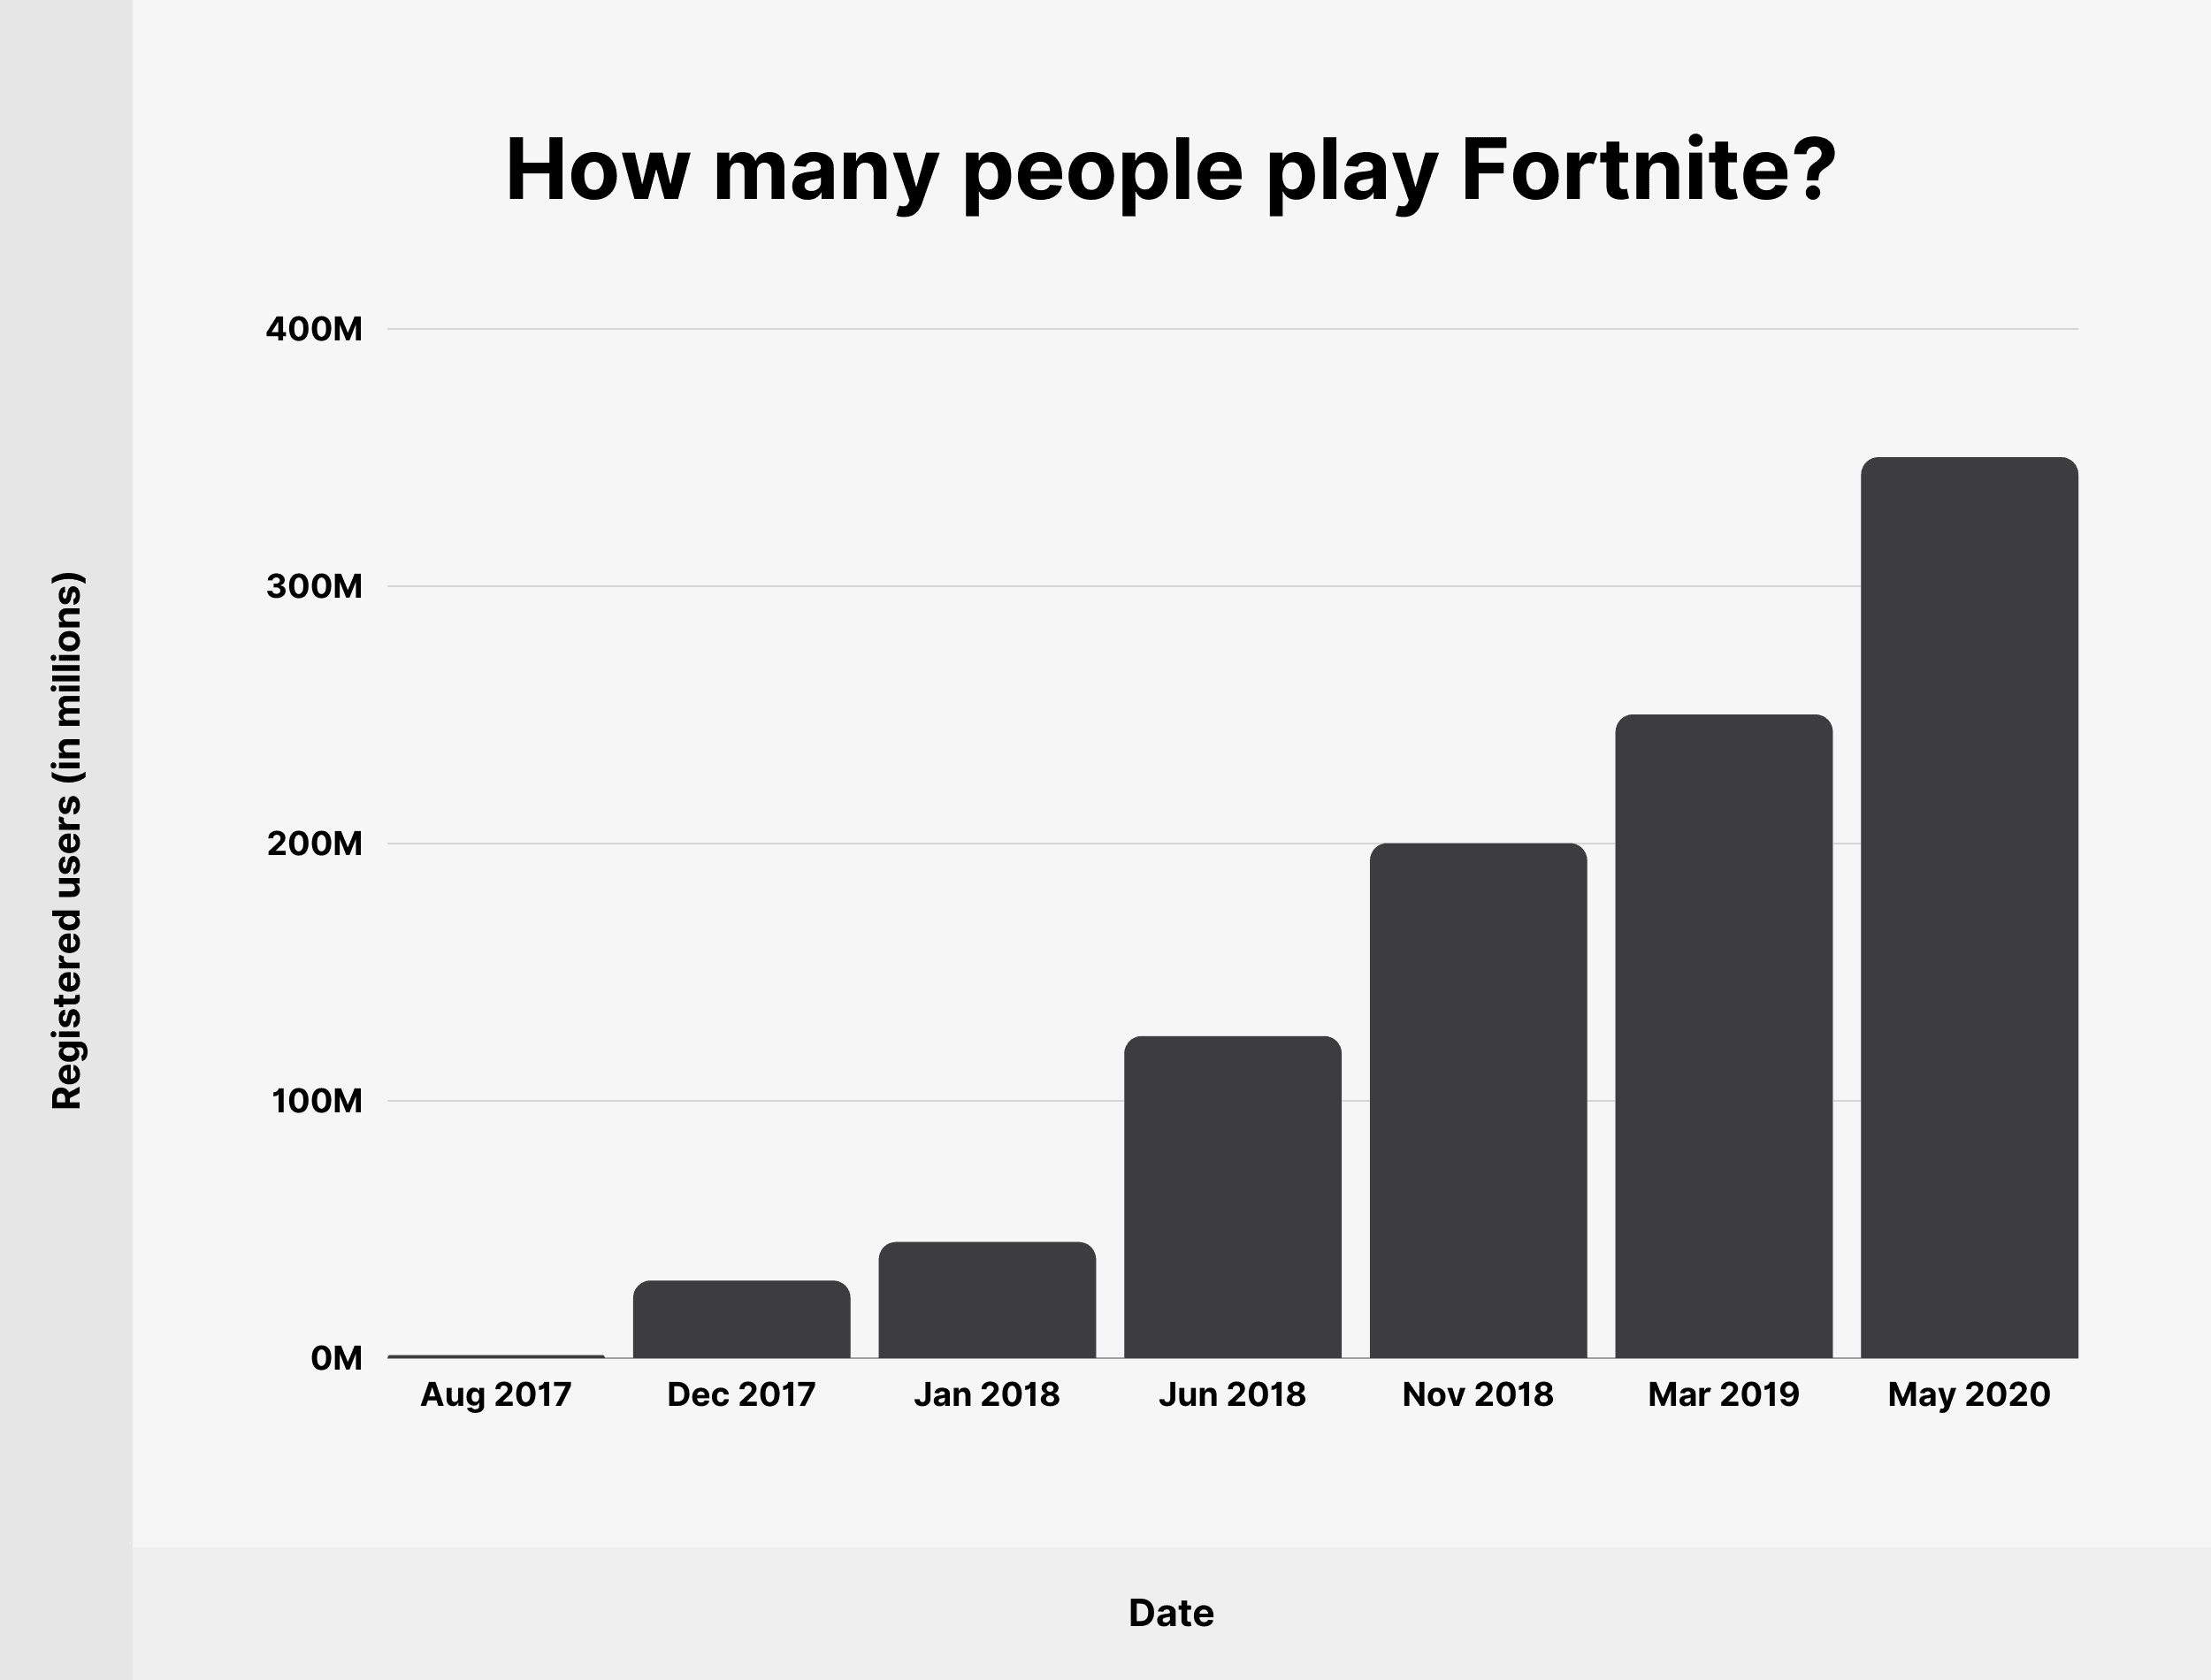 How many people play Fortnite?